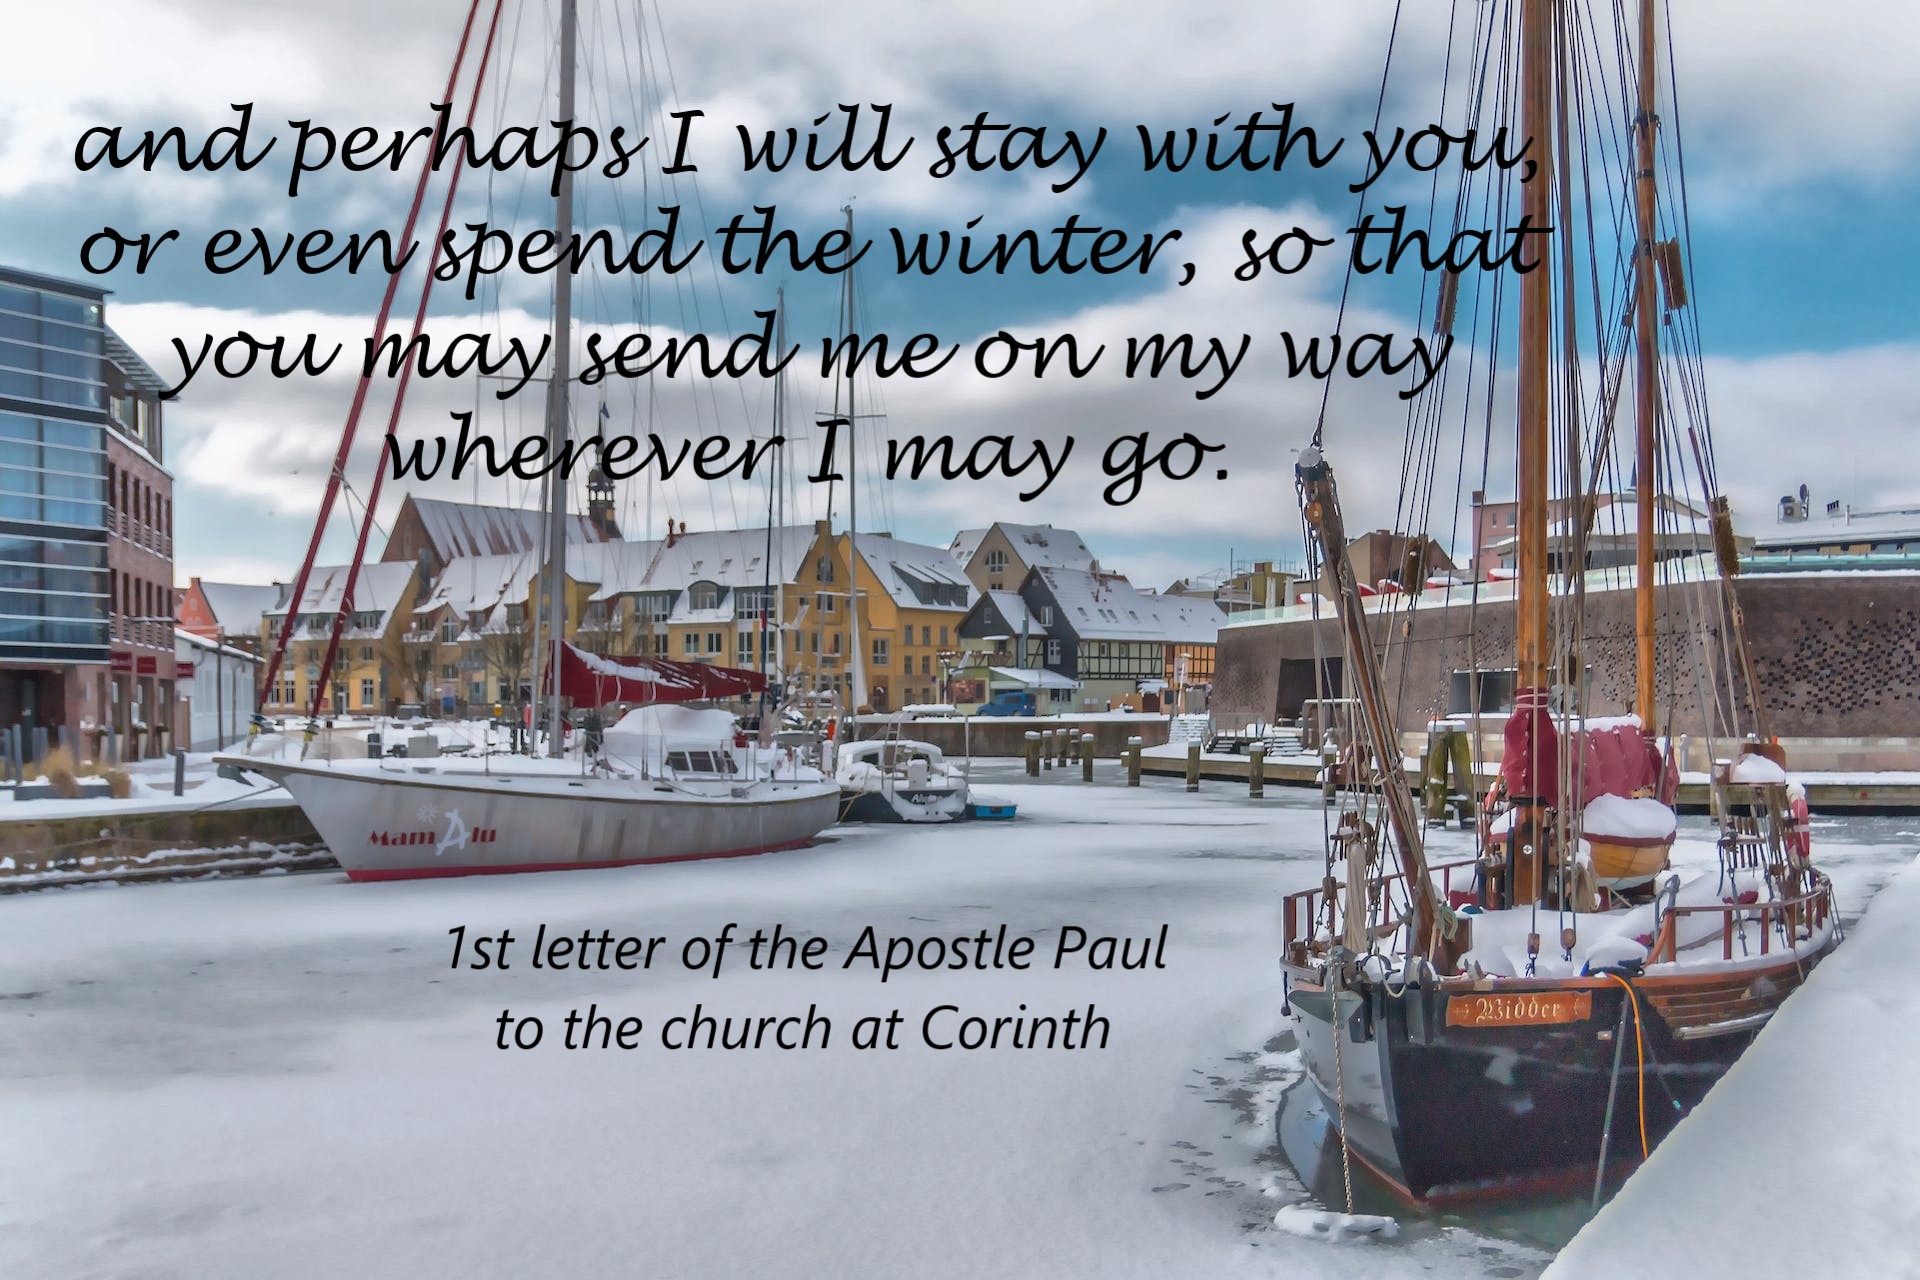 and perhaps I will stay with you, or even spend the winter, so that you may send me on my way wherever I may go. - 1 Corinthians 16:6 LSB - background photo of ships harbored on an icey inlet of town